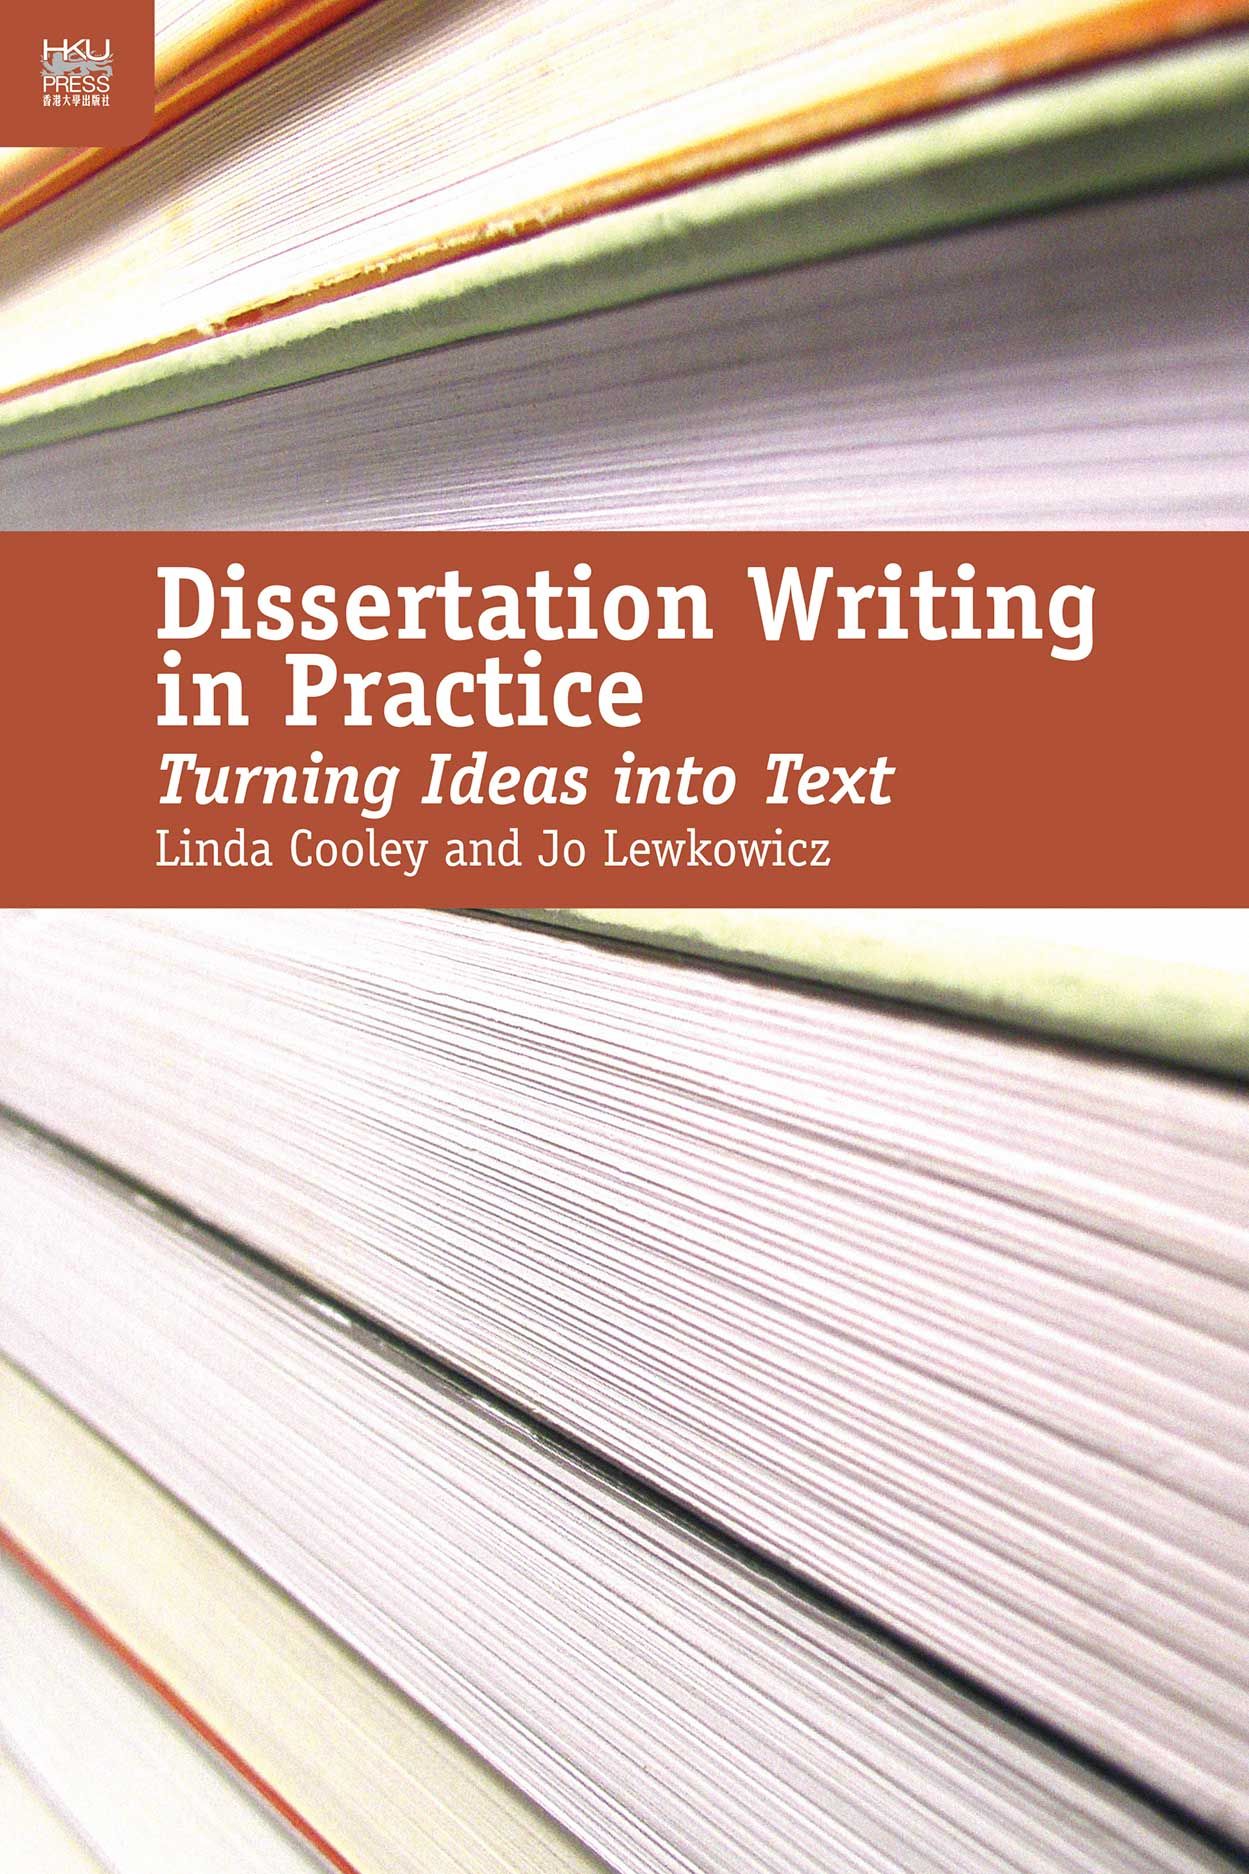 dissertation writing in practice turning ideas into text